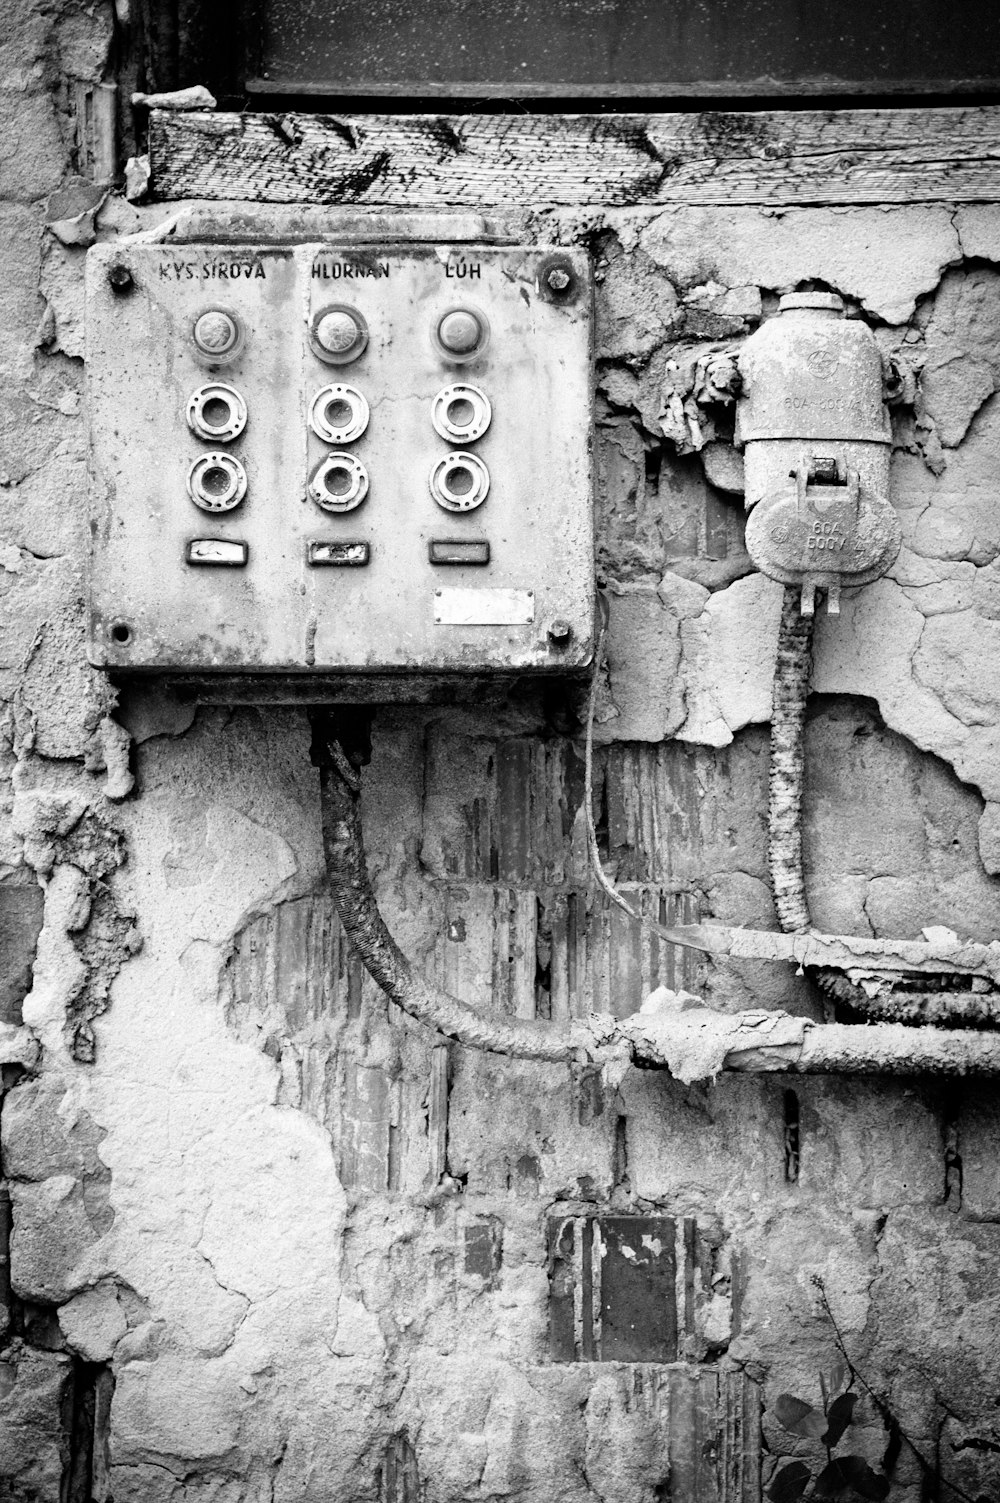 grayscale photo of a wall mounted device